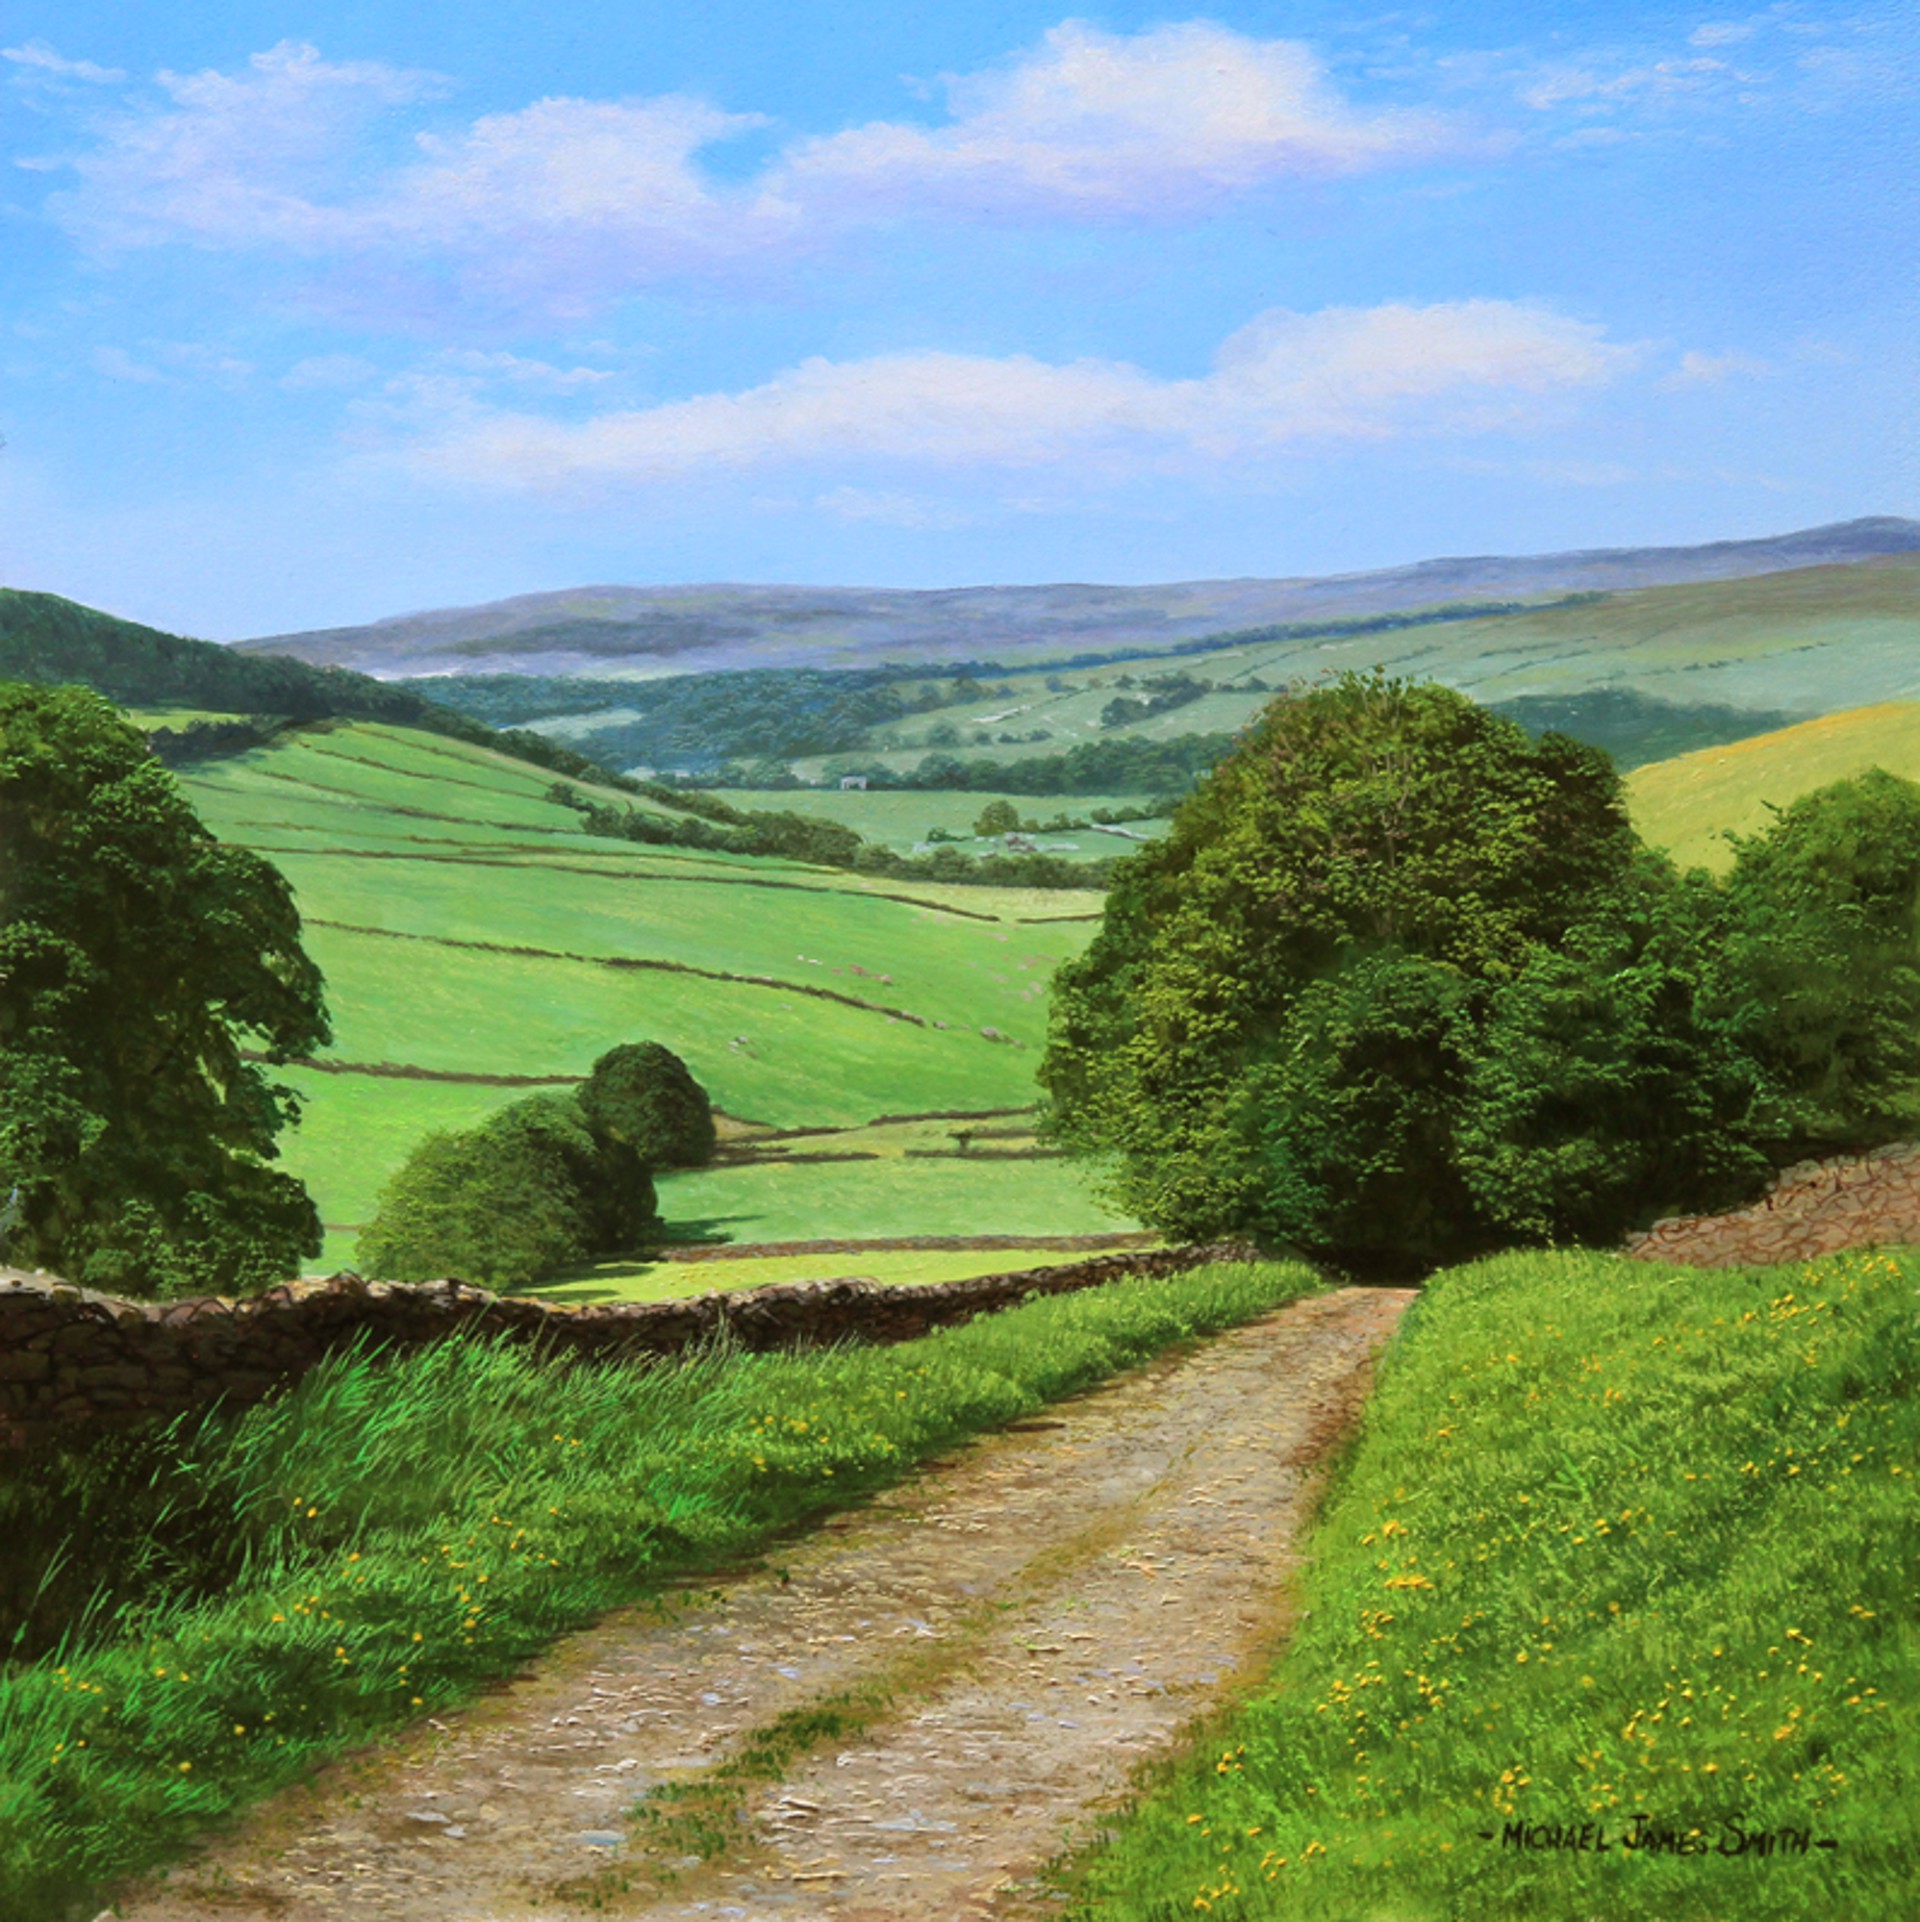 Summer in Derbyshire by Michael James Smith